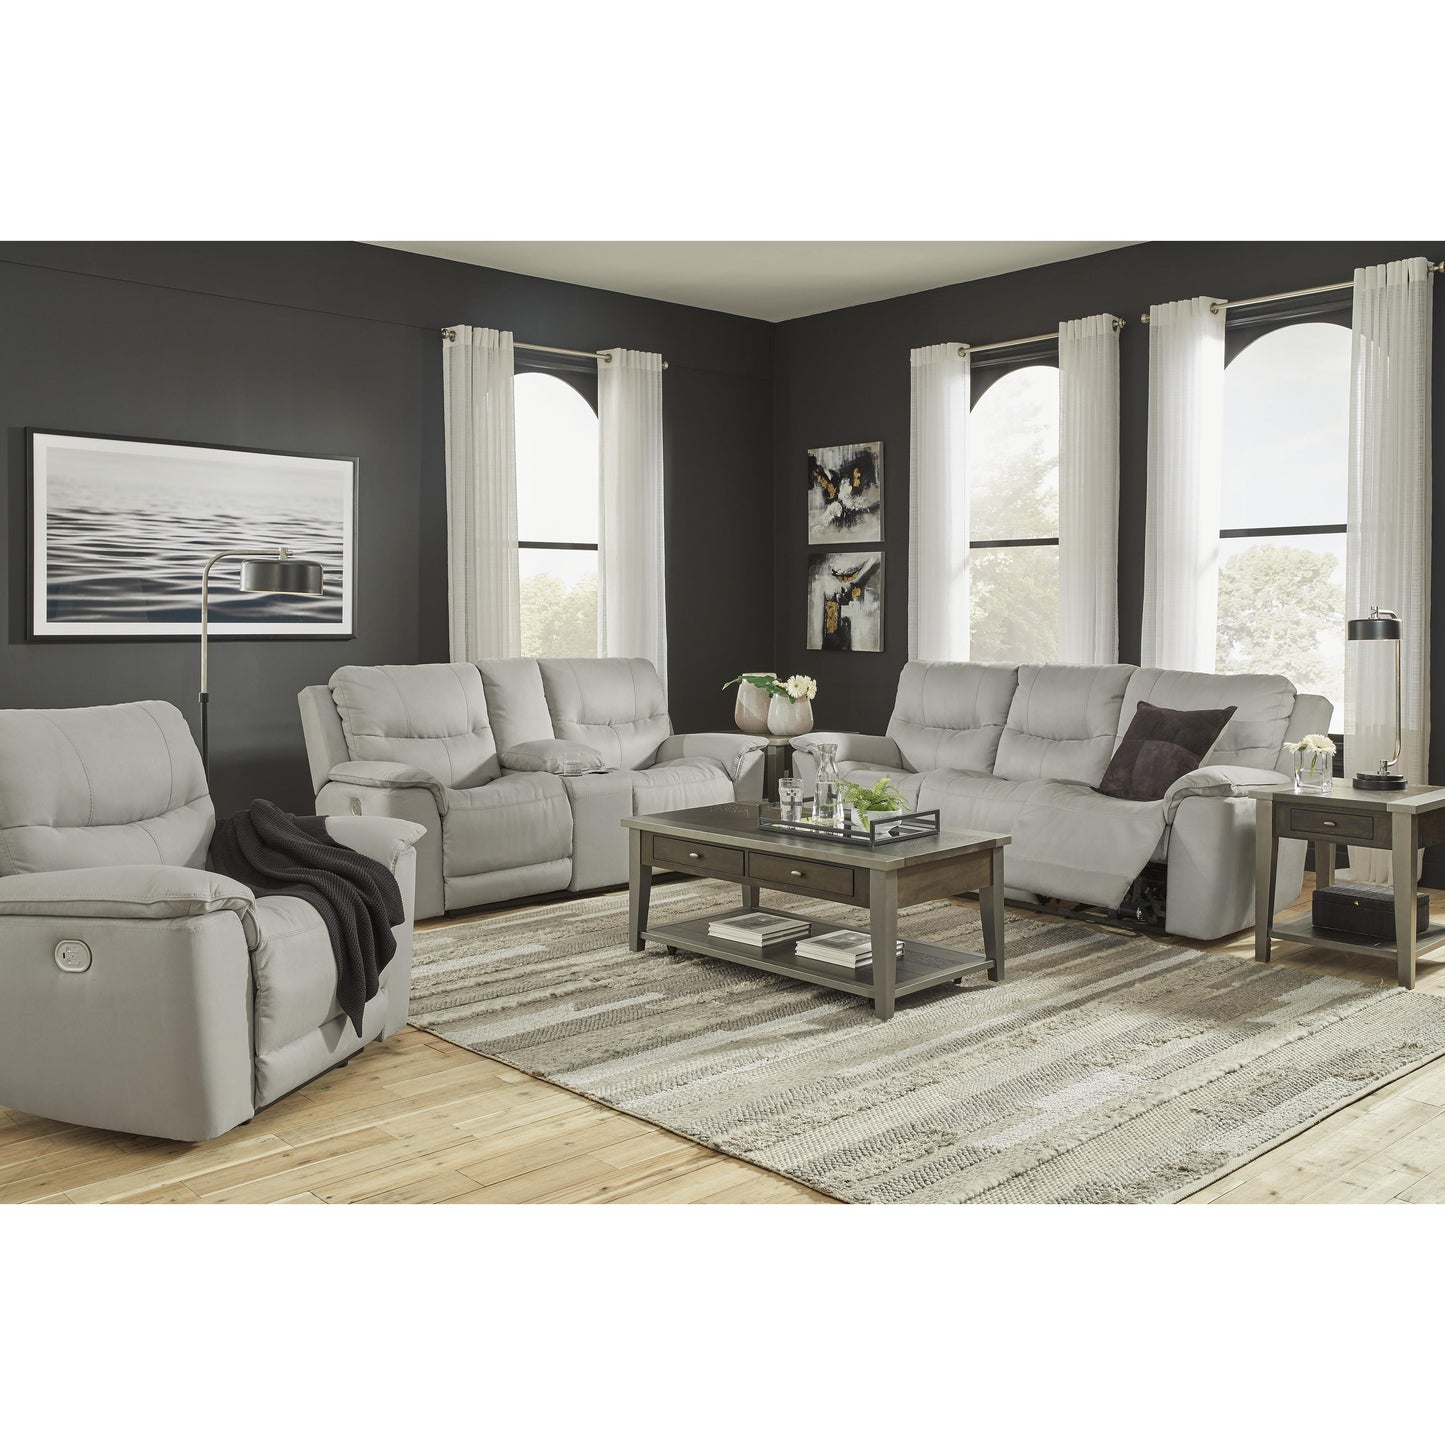 Signature Design by Ashley Next-Gen Gaucho Power Reclining Leather Look Loveseat 6080618 IMAGE 14